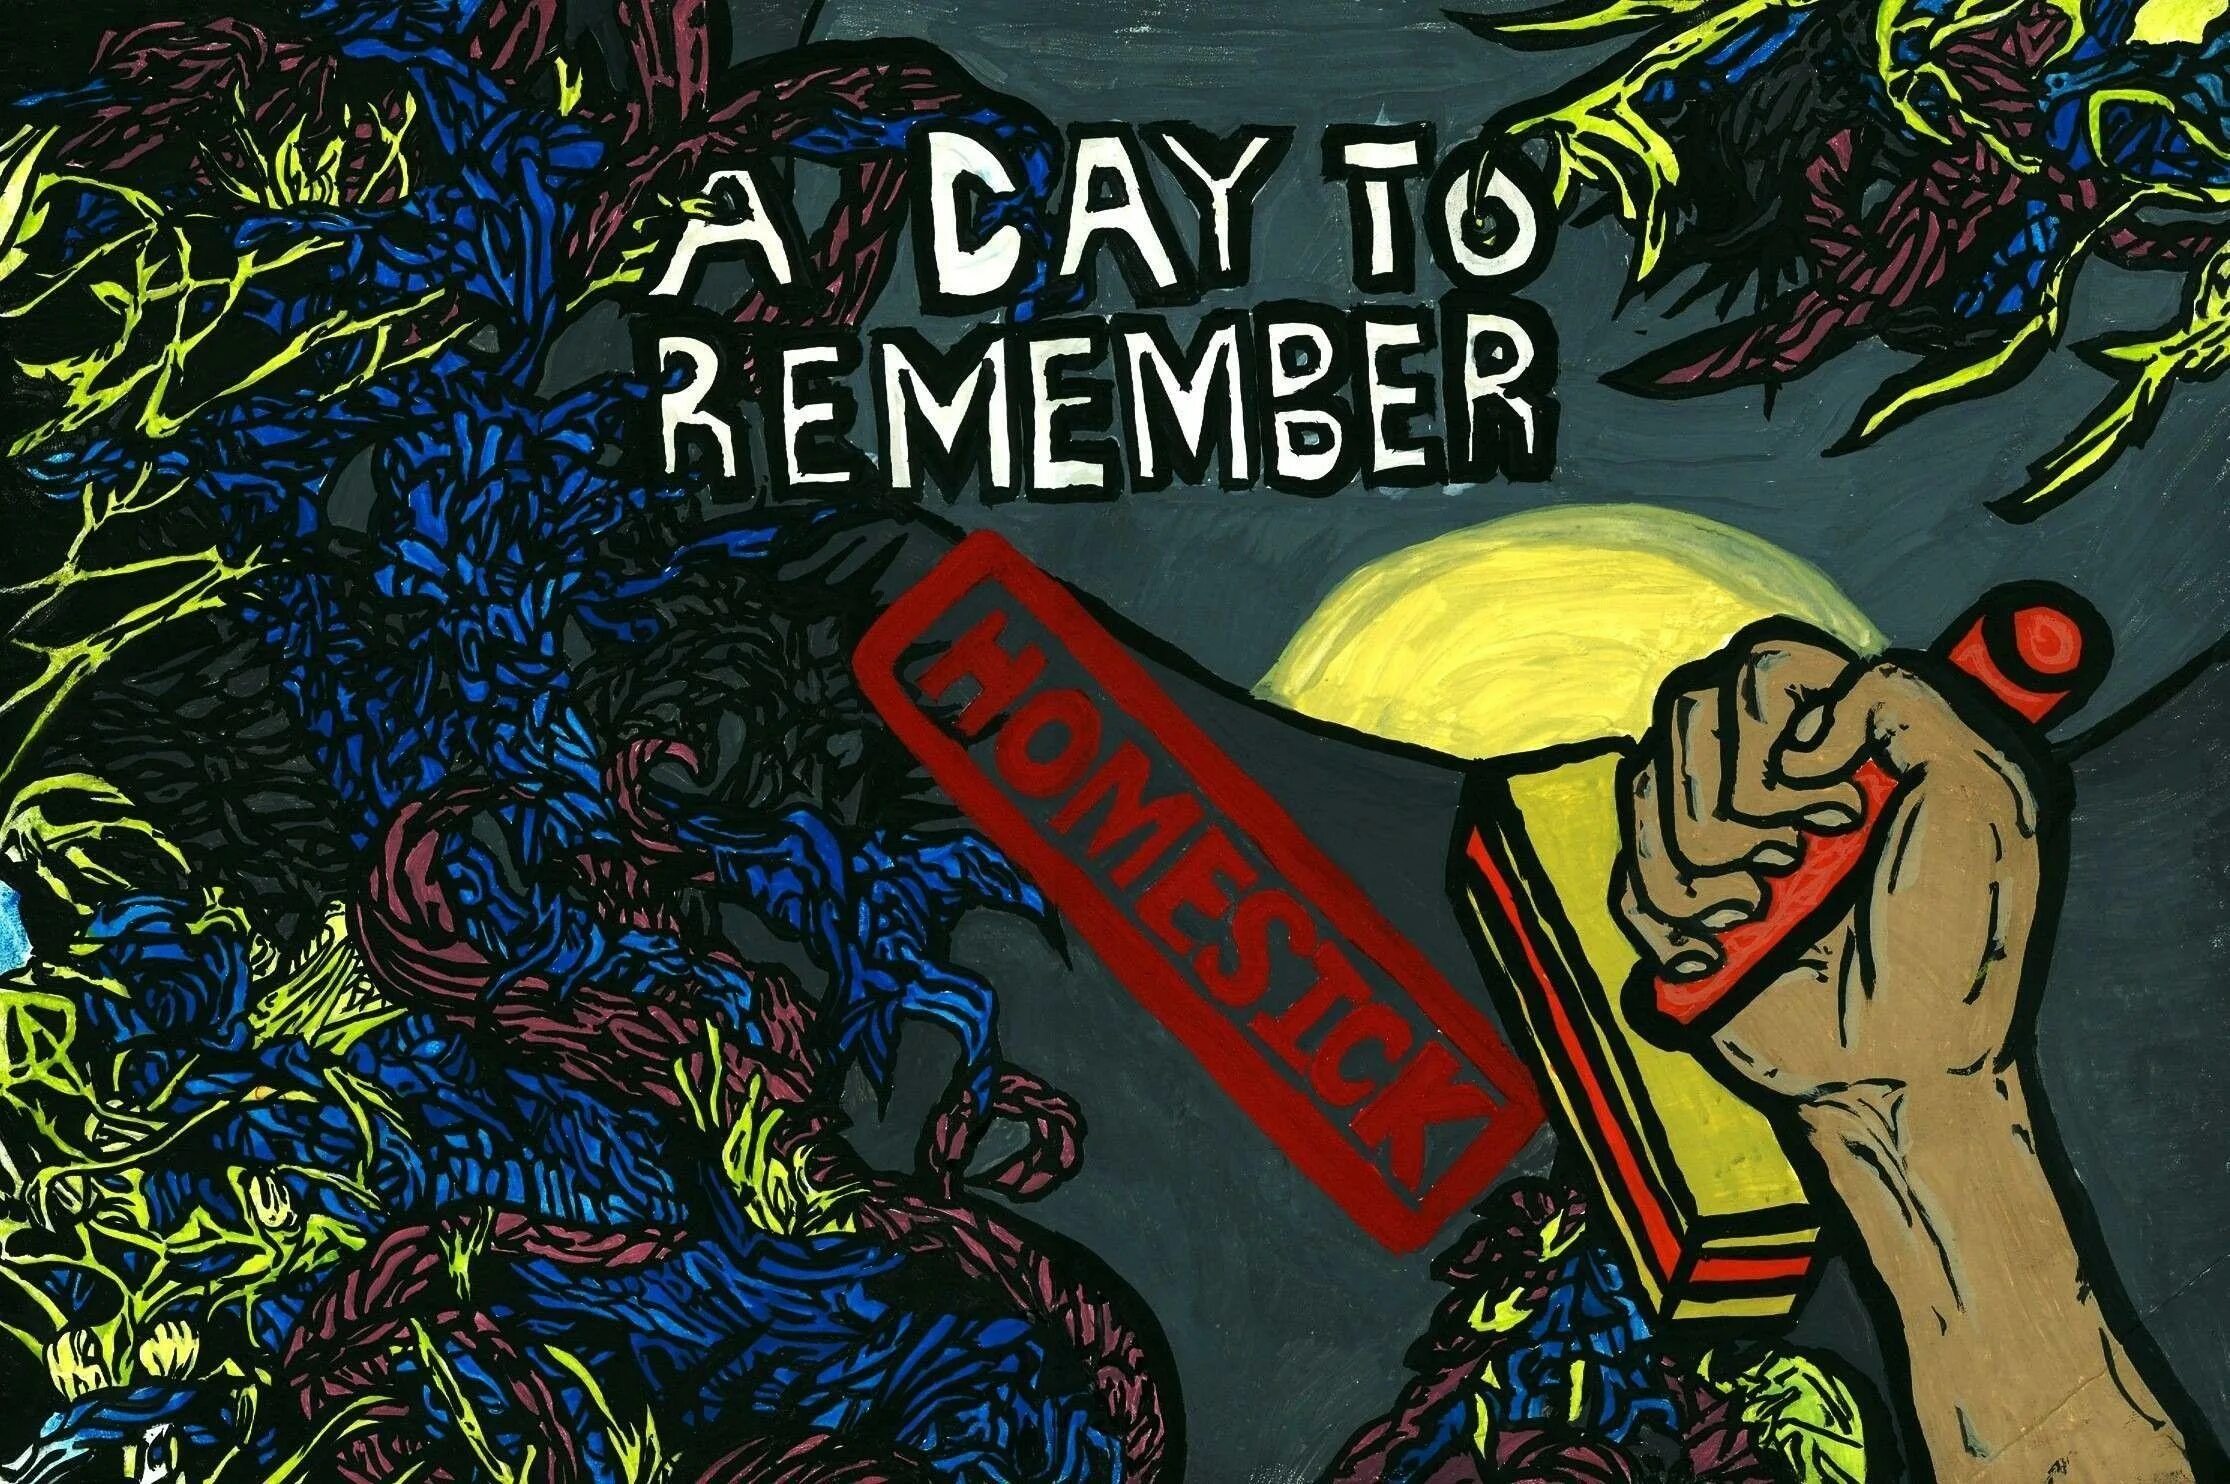 The day we remember. A Day to remember. A Day to remember логотип. Группа a Day to remember. A Day to remember обложка обои.